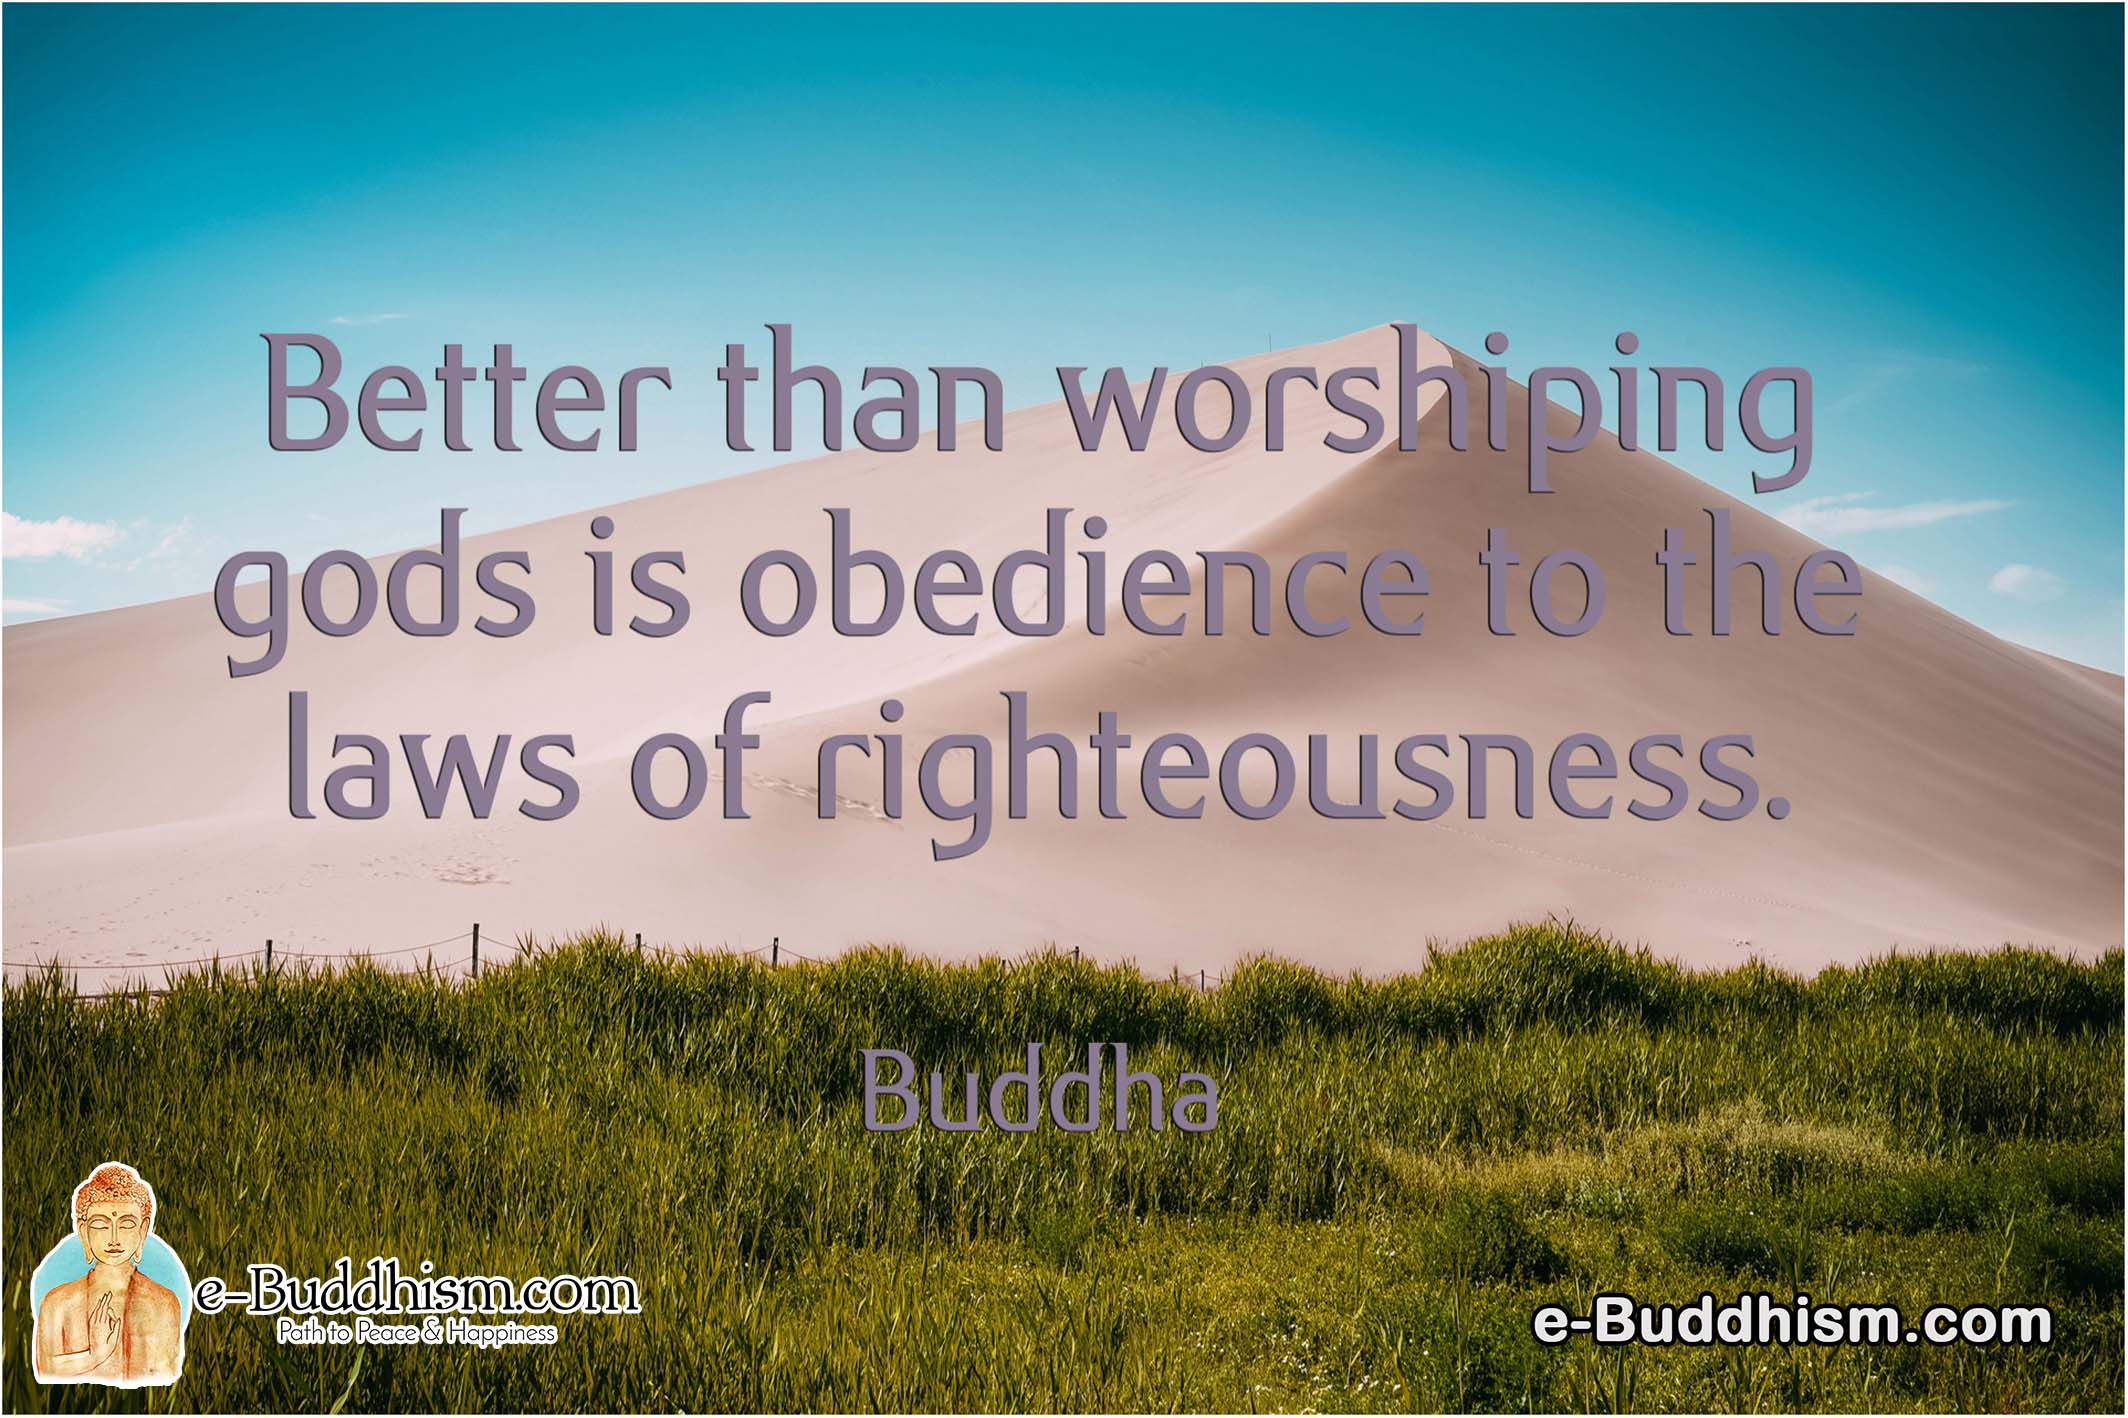 Better than worshipping gods is obedience to the laws of righteousness. -Buddha